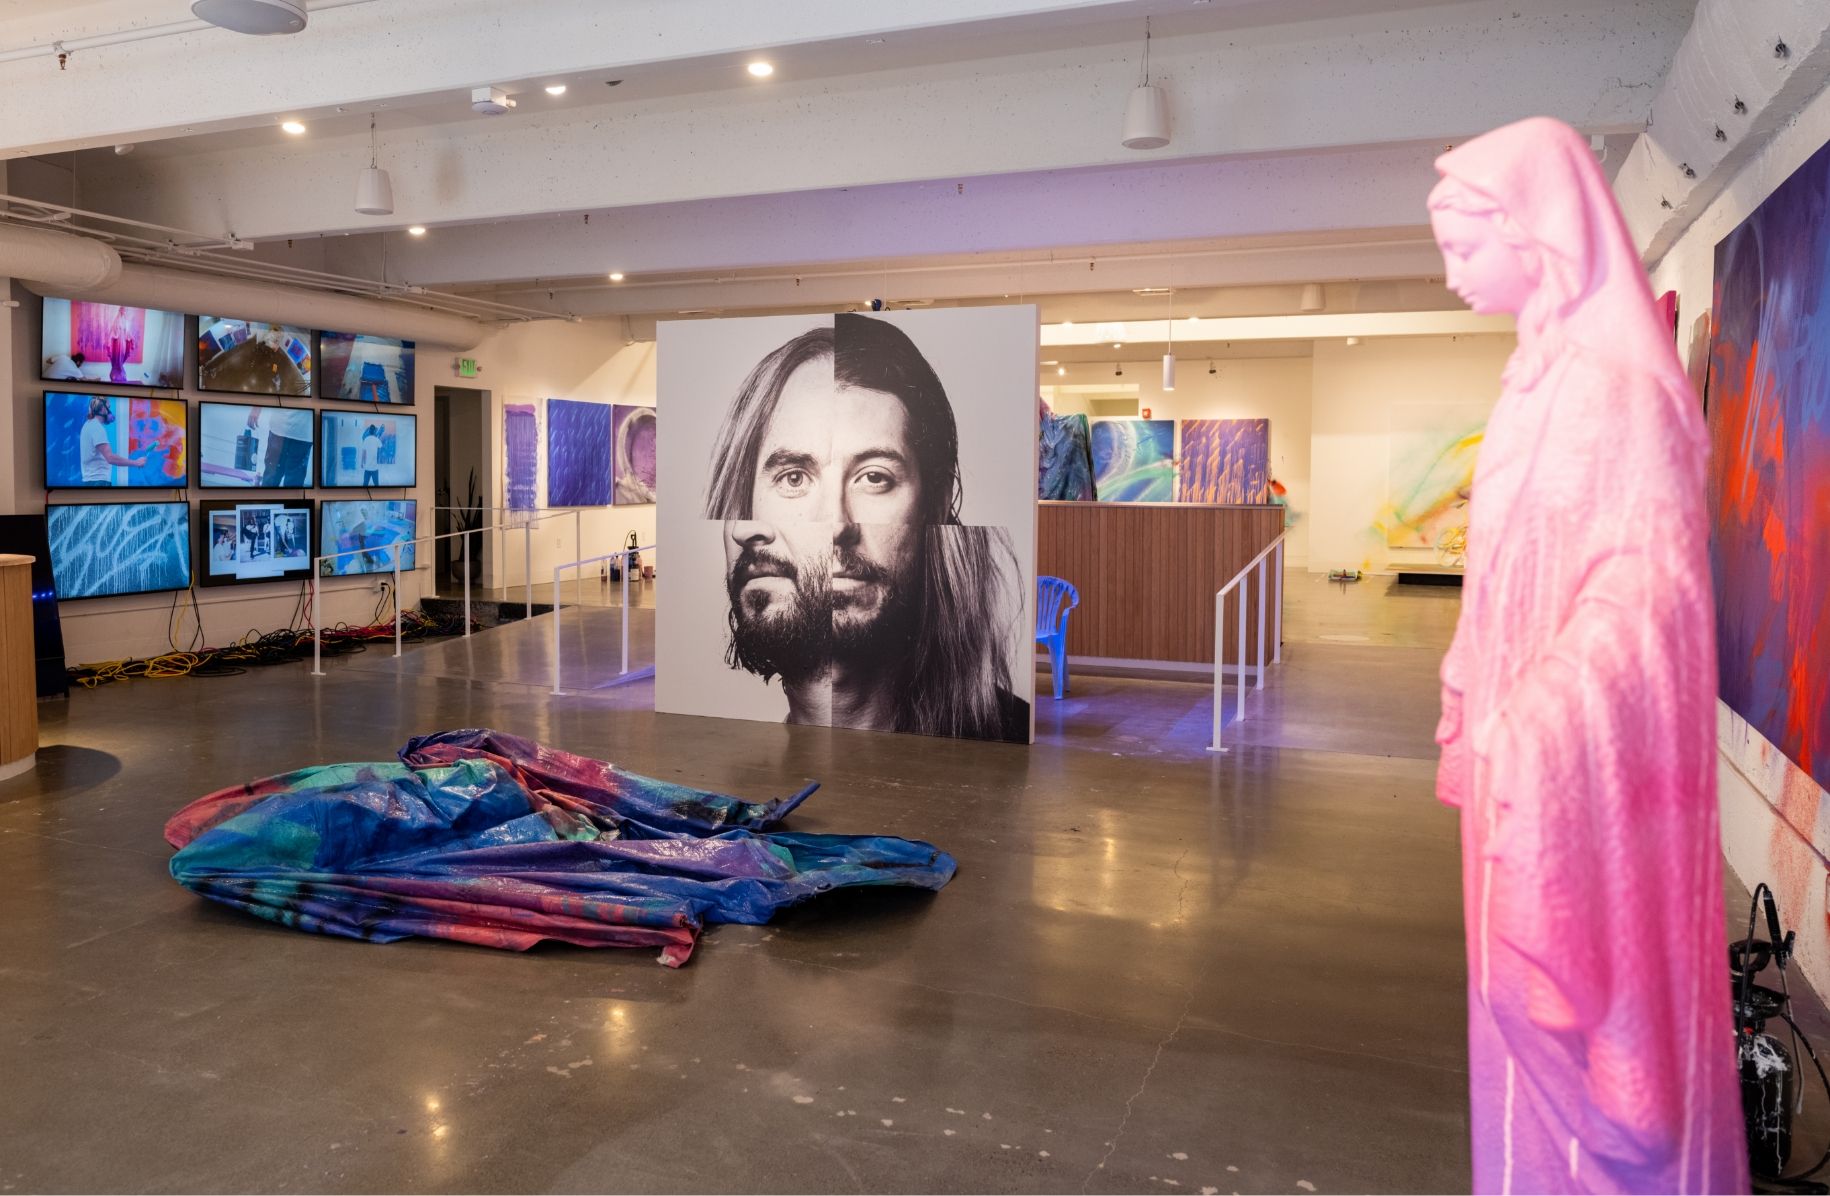 View of whole show from gallery floor. Mother Mary spray painted statue, painted tarp sculpture, face montage and video screen wall prominent